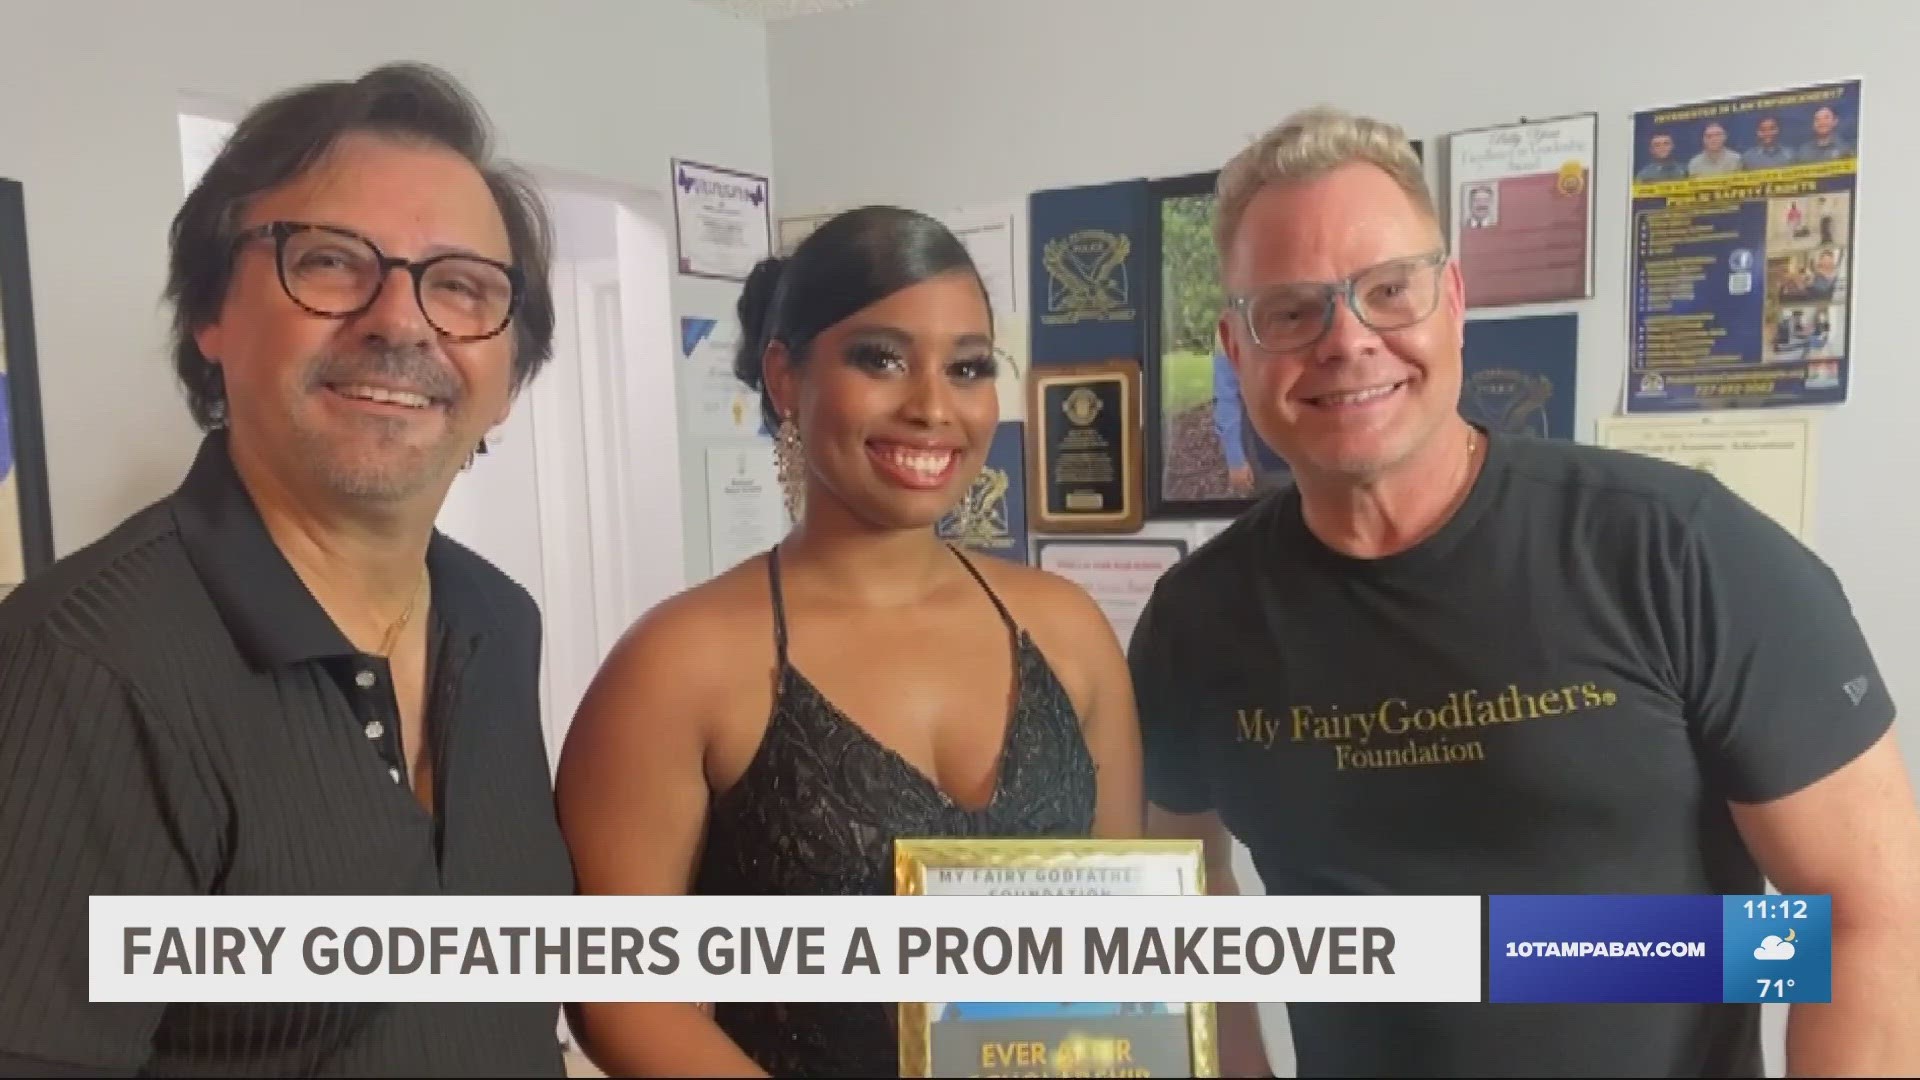 Steven Anderson and Andrew Ashton from My Fairy Godfathers say Miriam’s ability to persevere and excel is why they chose her for the makeover.